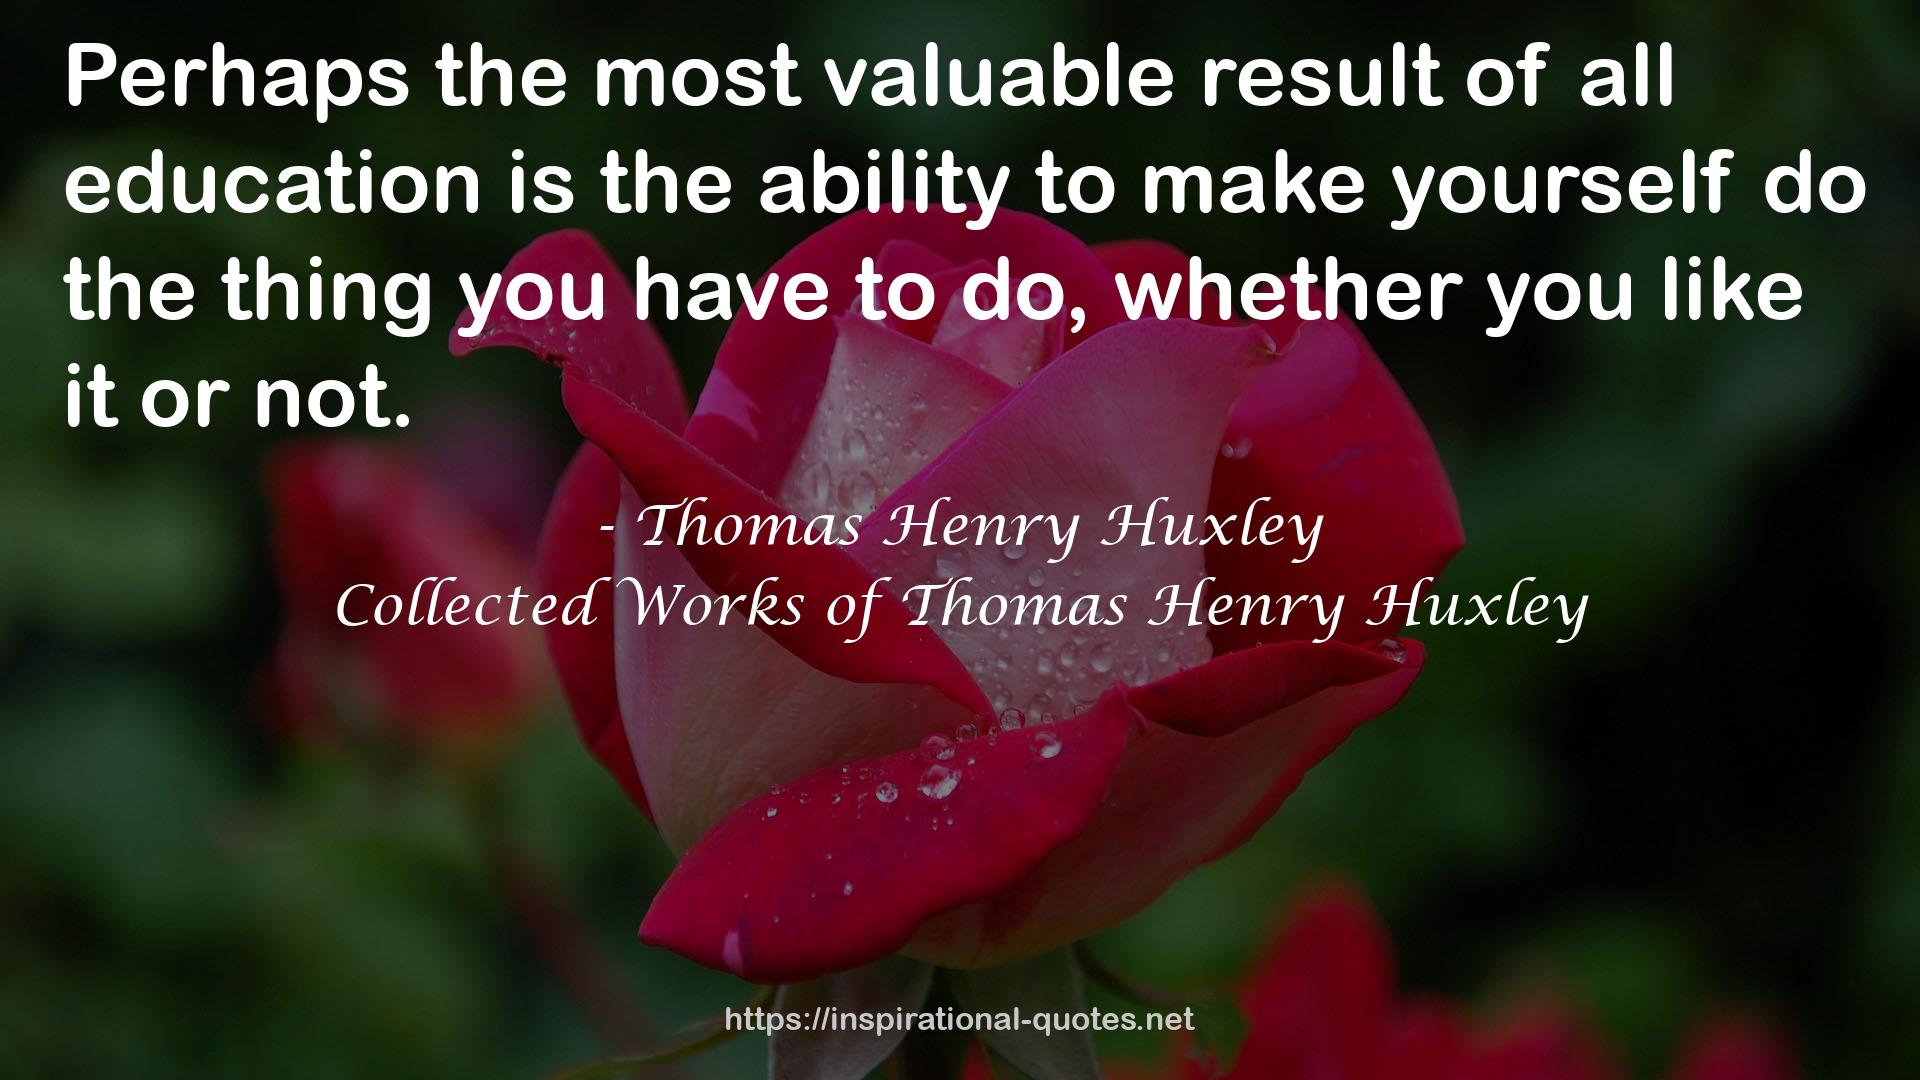 Collected Works of Thomas Henry Huxley QUOTES